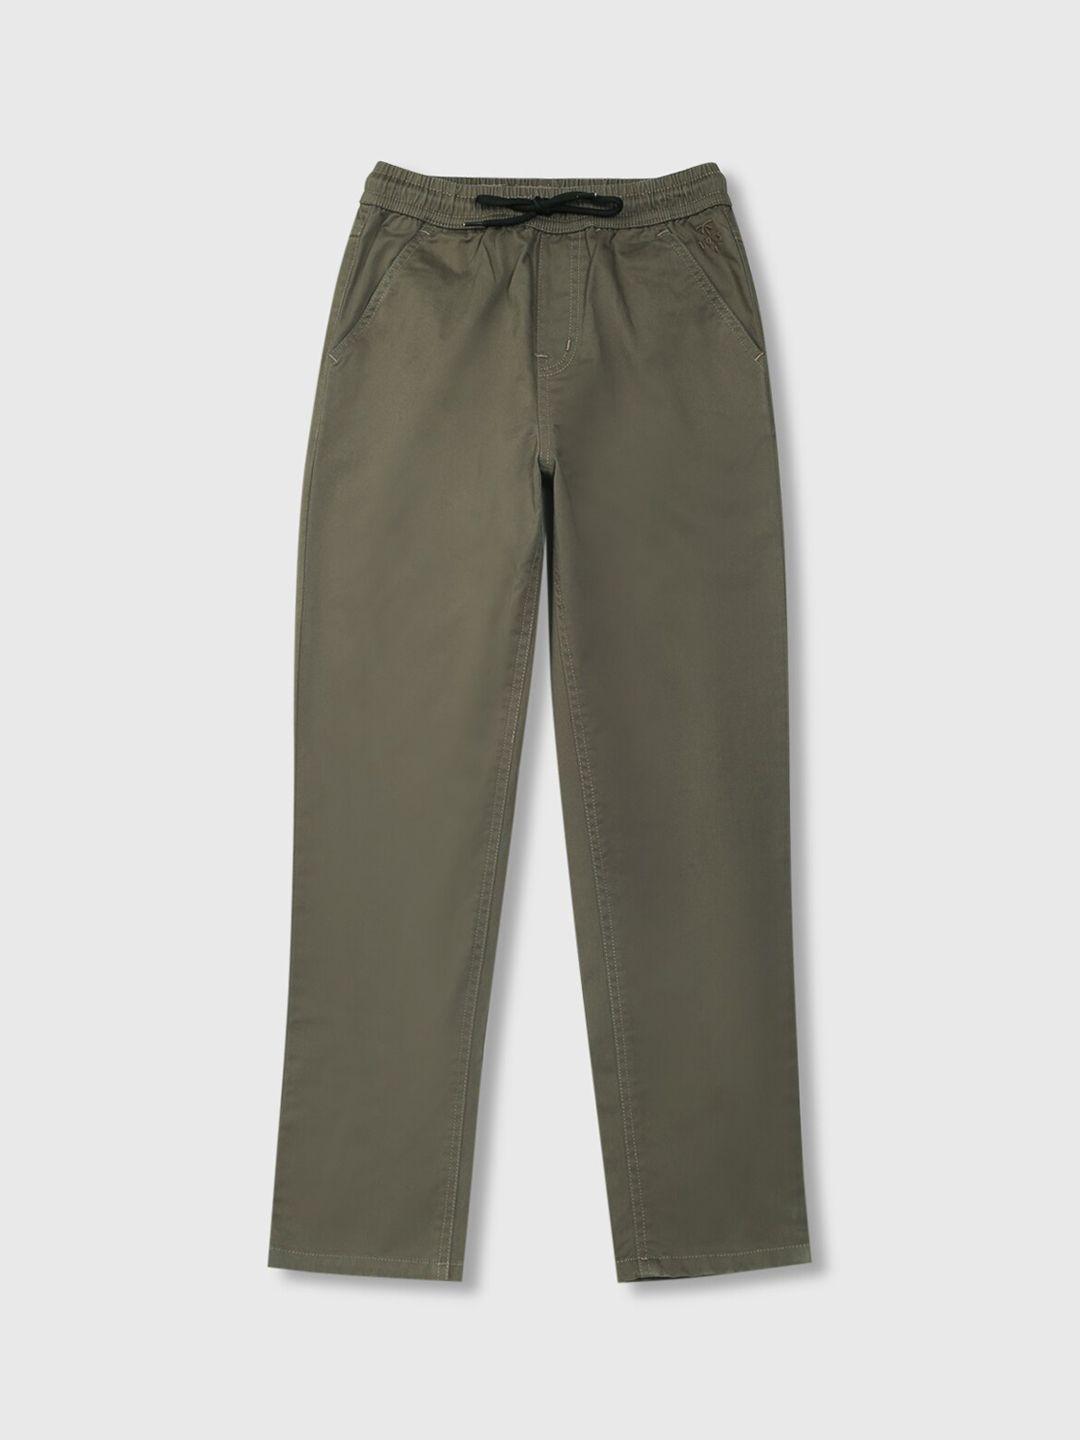 palm tree boys mid-rise cotton trousers